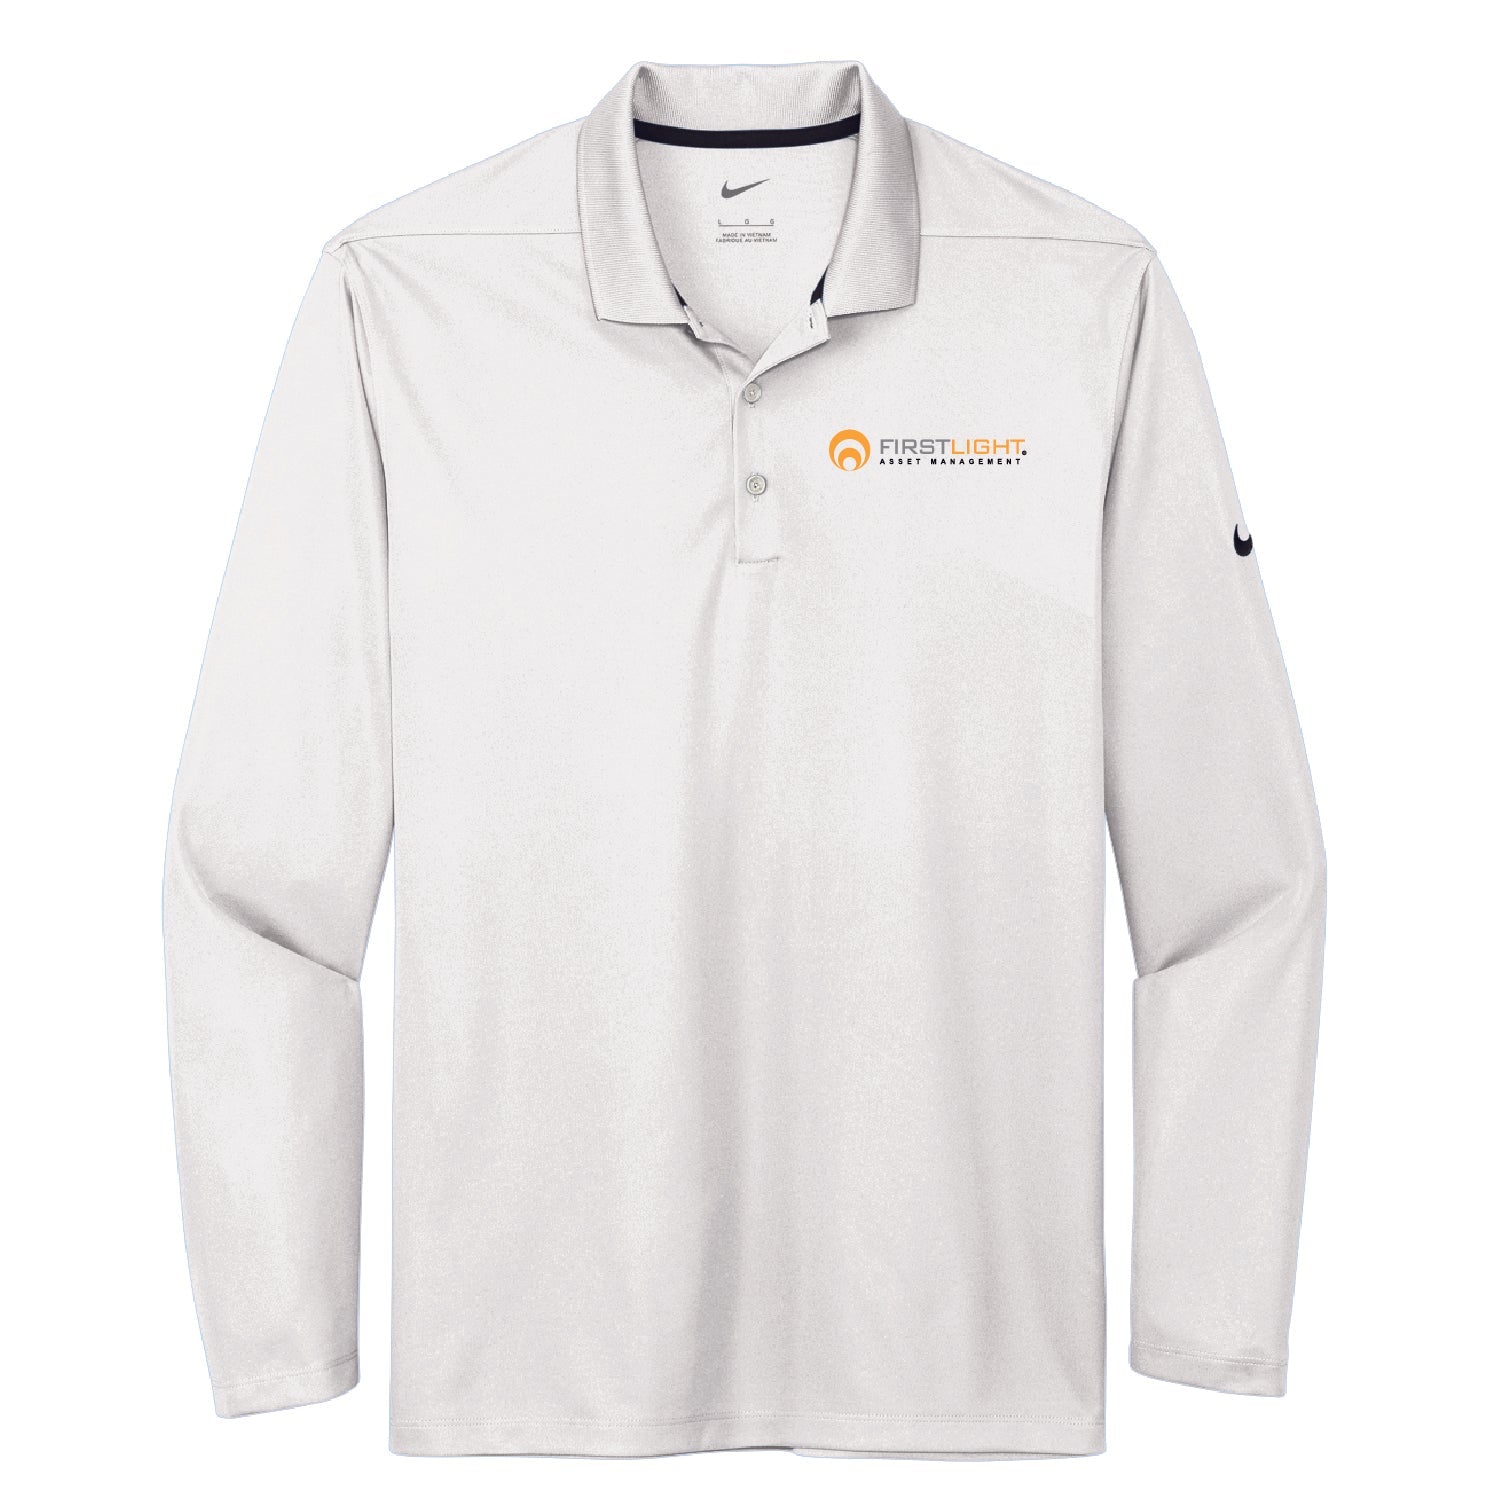 First Light Nike Long Sleeve Dri-FIT Stretch Tech Polo - DSP On Demand